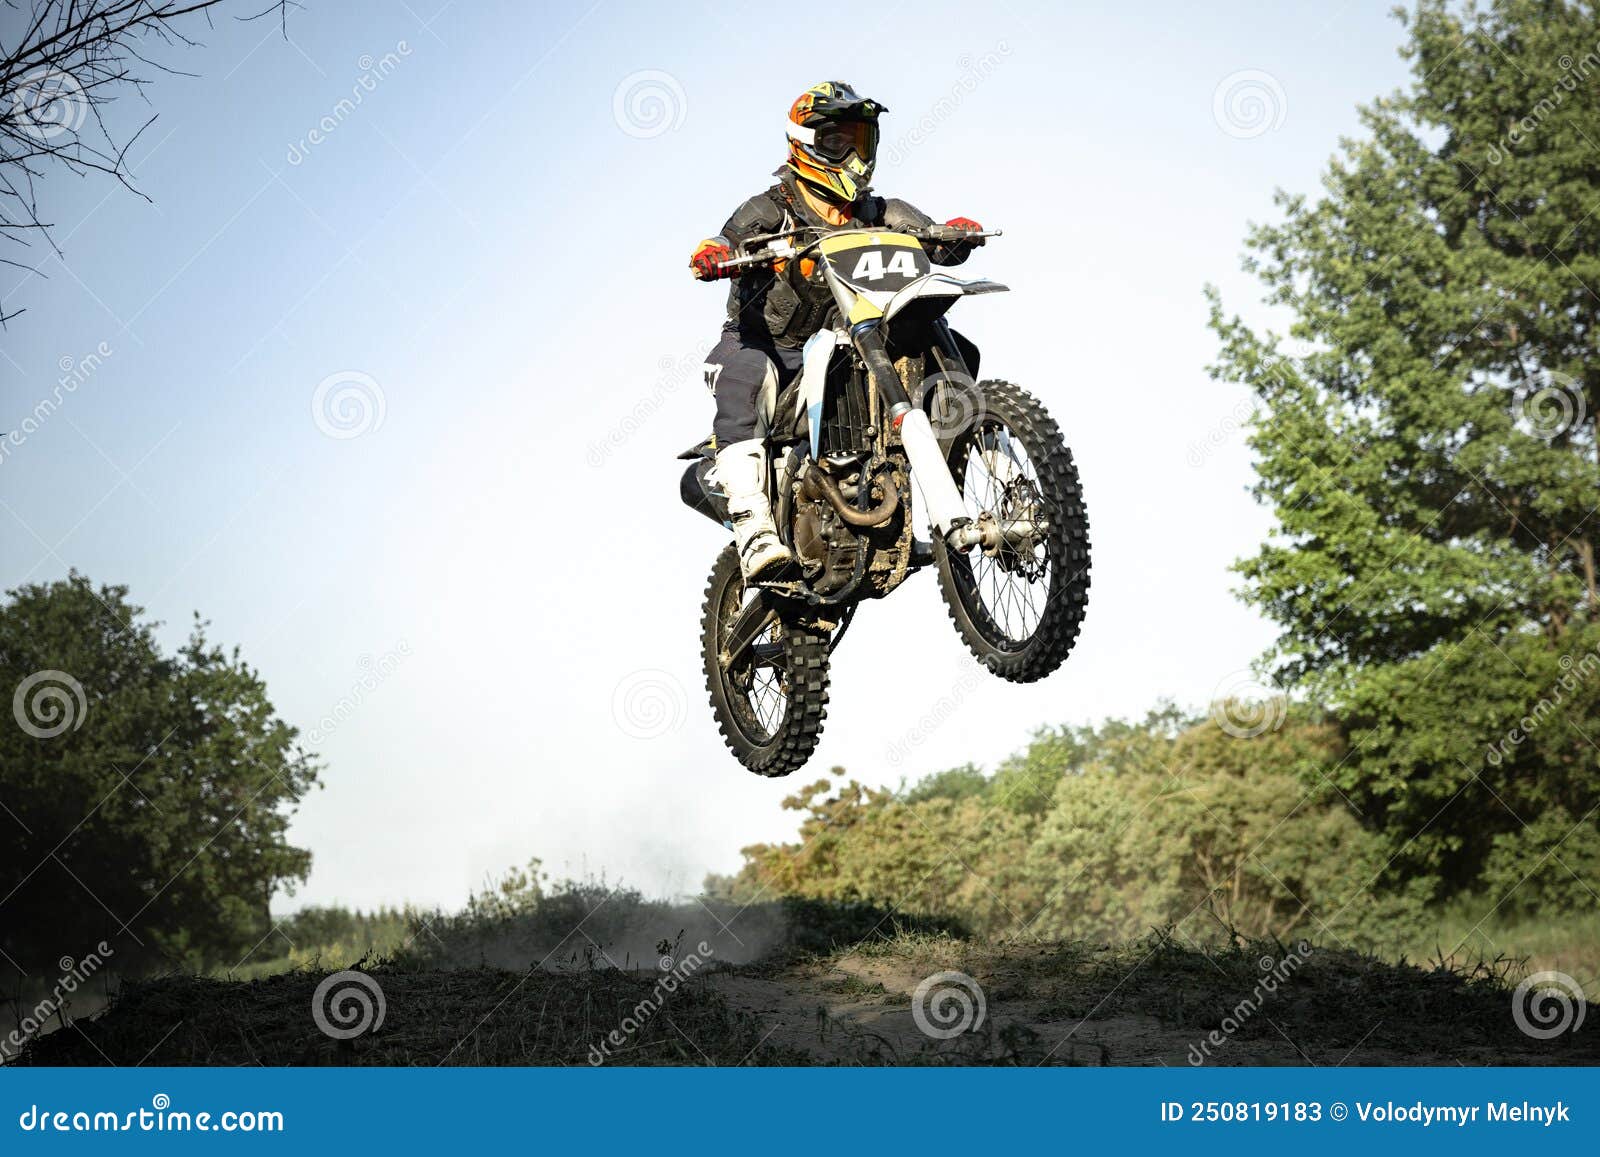 Live Shot of Male Sportsman Training on Motorbike at Hot Summer Day, Outdoors